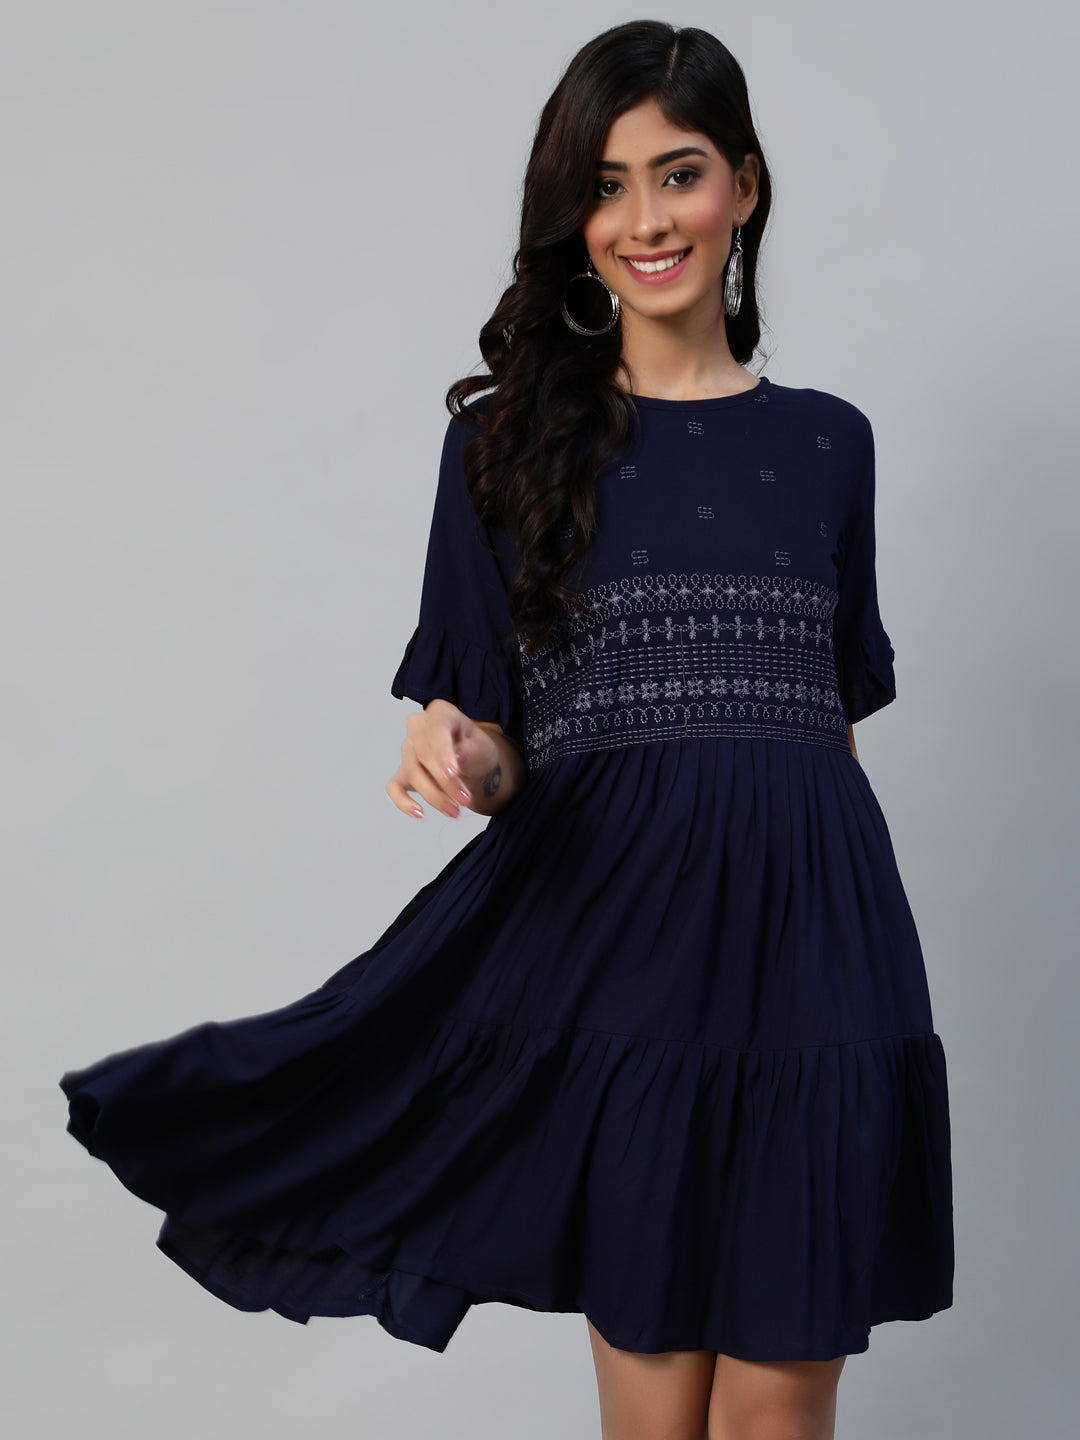 Women's's Navy Blue Embroidered Dress